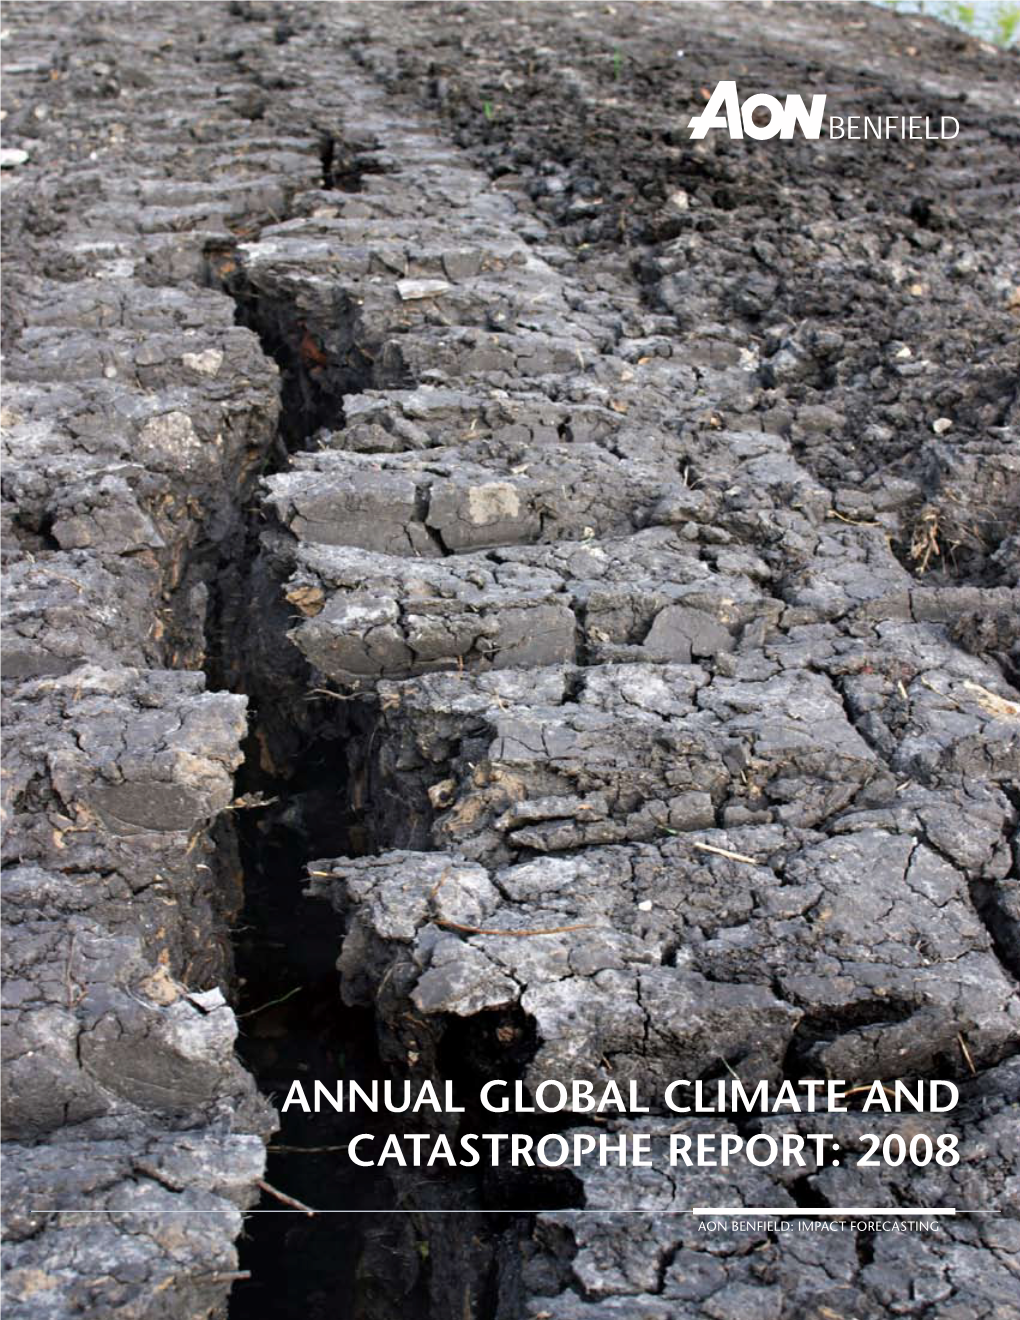 Annual Global Climate and Catastrophe Report: 2008